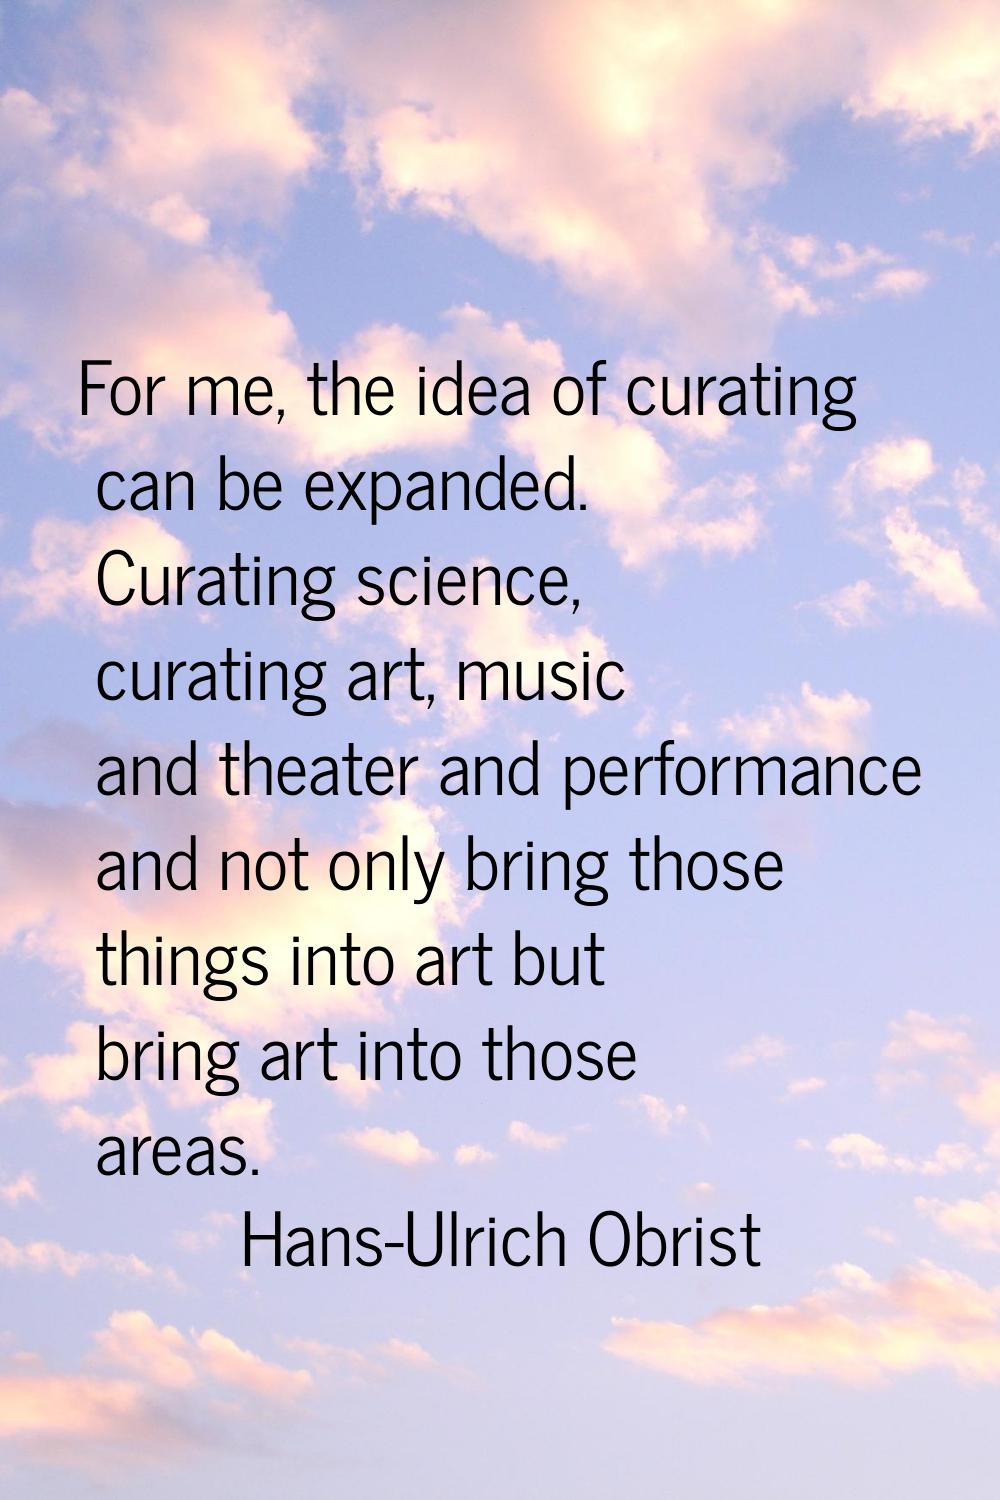 For me, the idea of curating can be expanded. Curating science, curating art, music and theater and